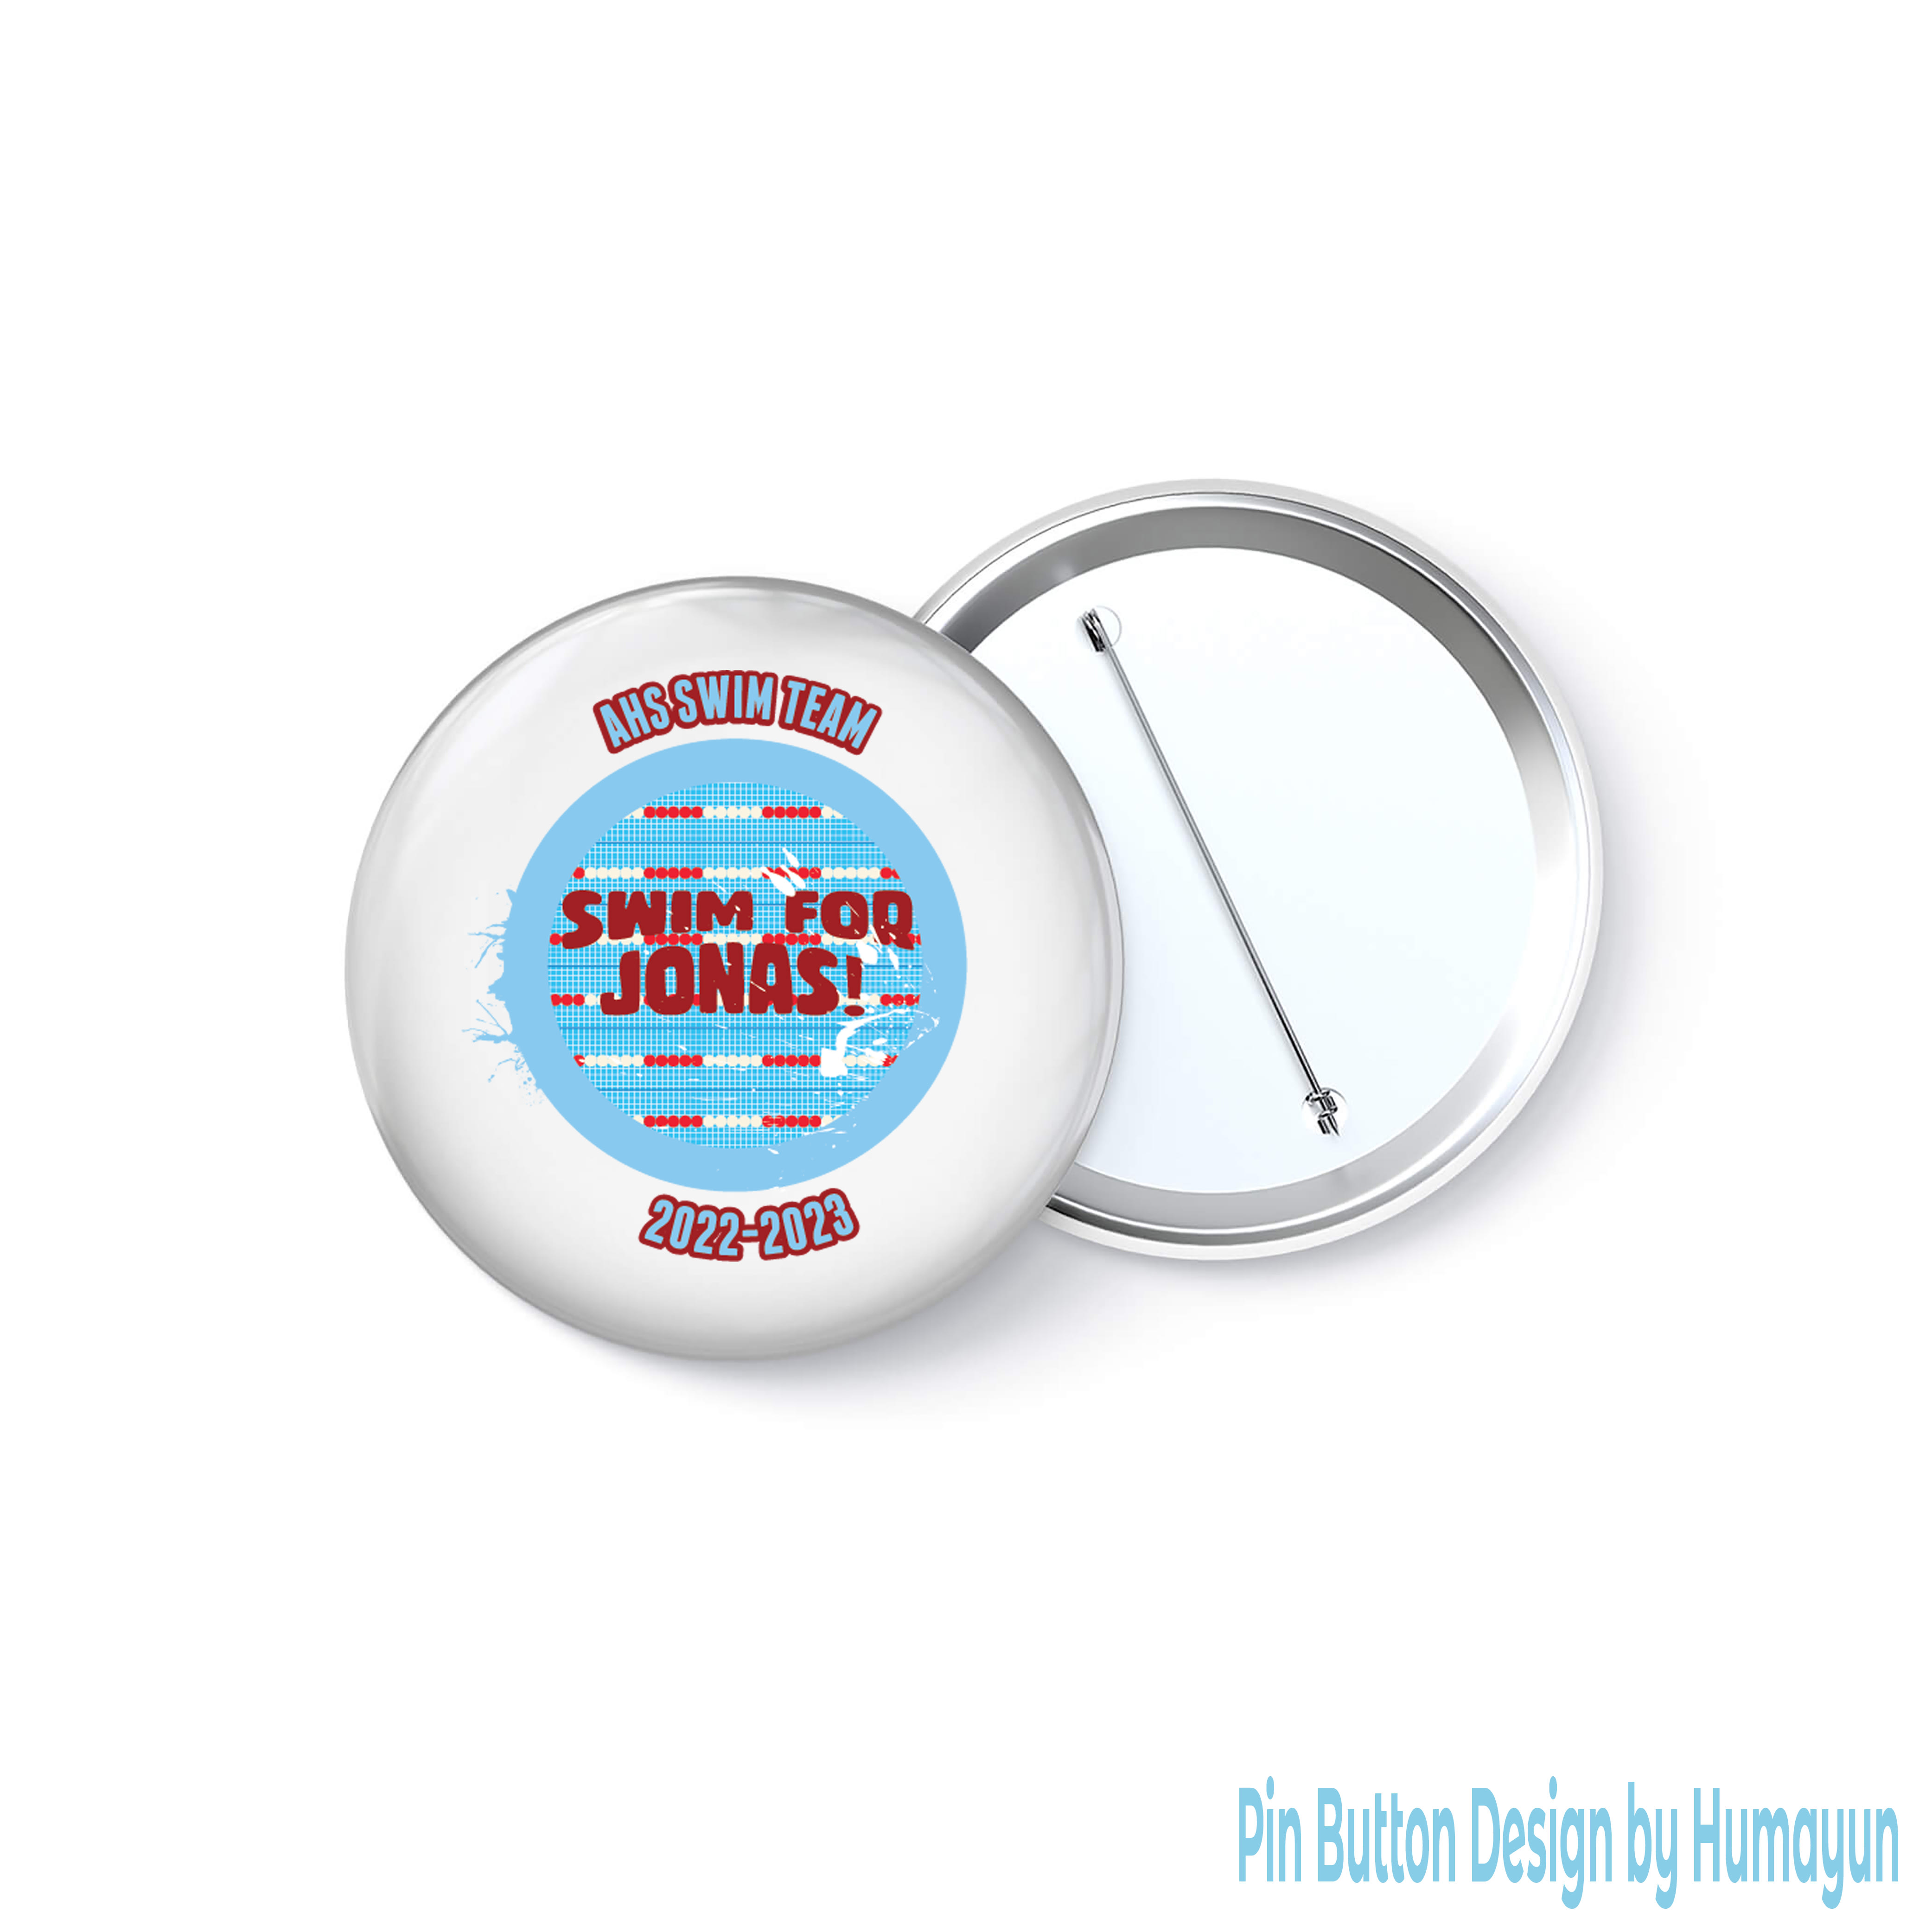 I'm Taking The Day Off - Pinback Button Badge 1 1/2 inch 1.5 - Keychain Magnet or Flatback